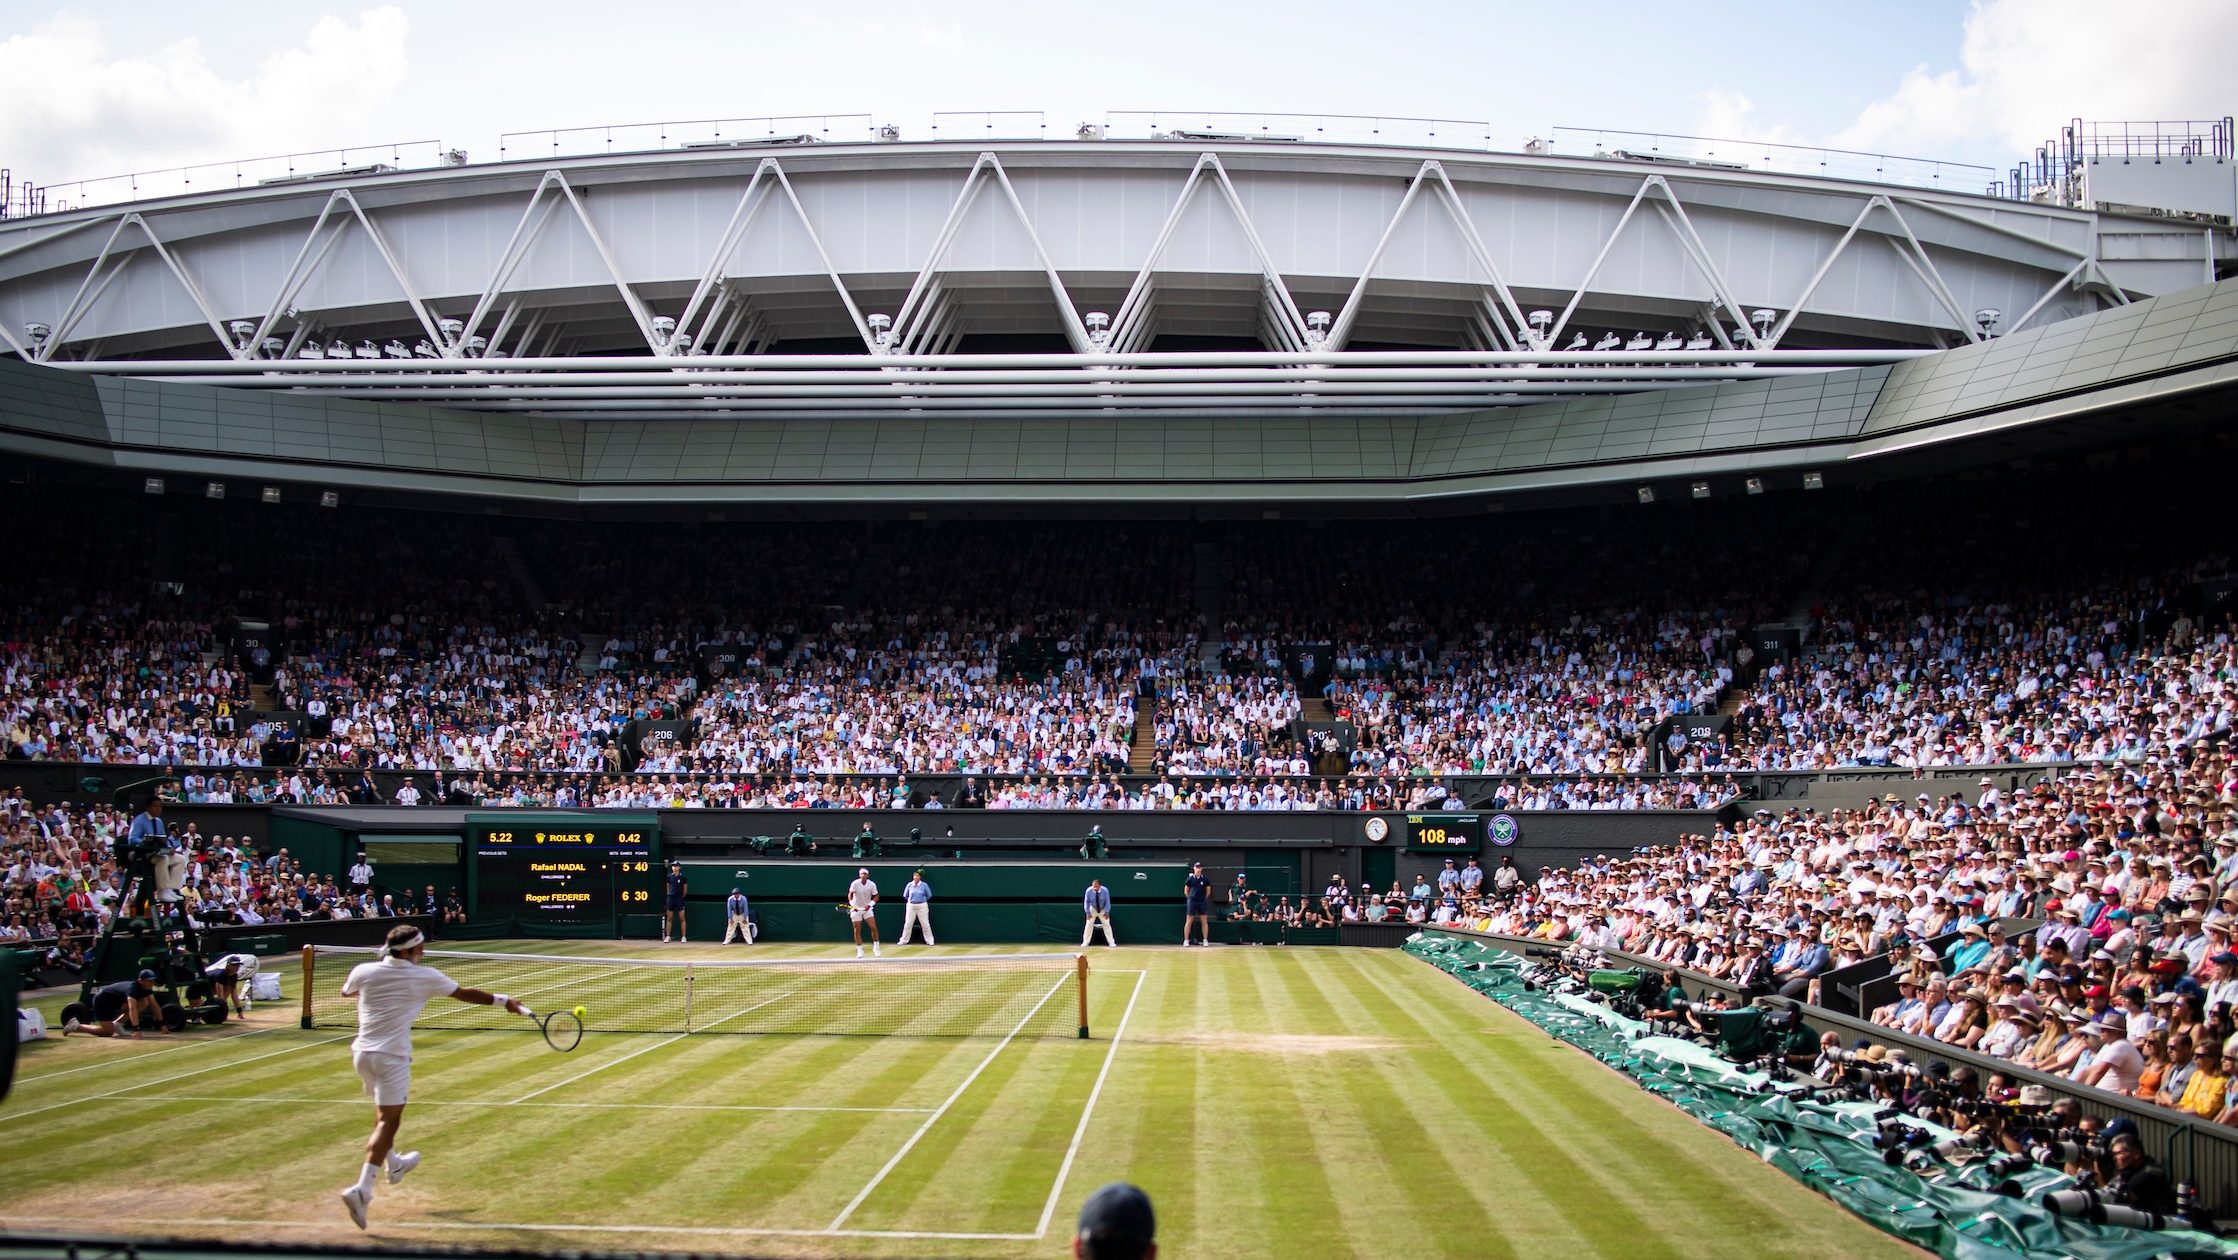 Monday Digest players squeeze in one last tournament before Wimbledon